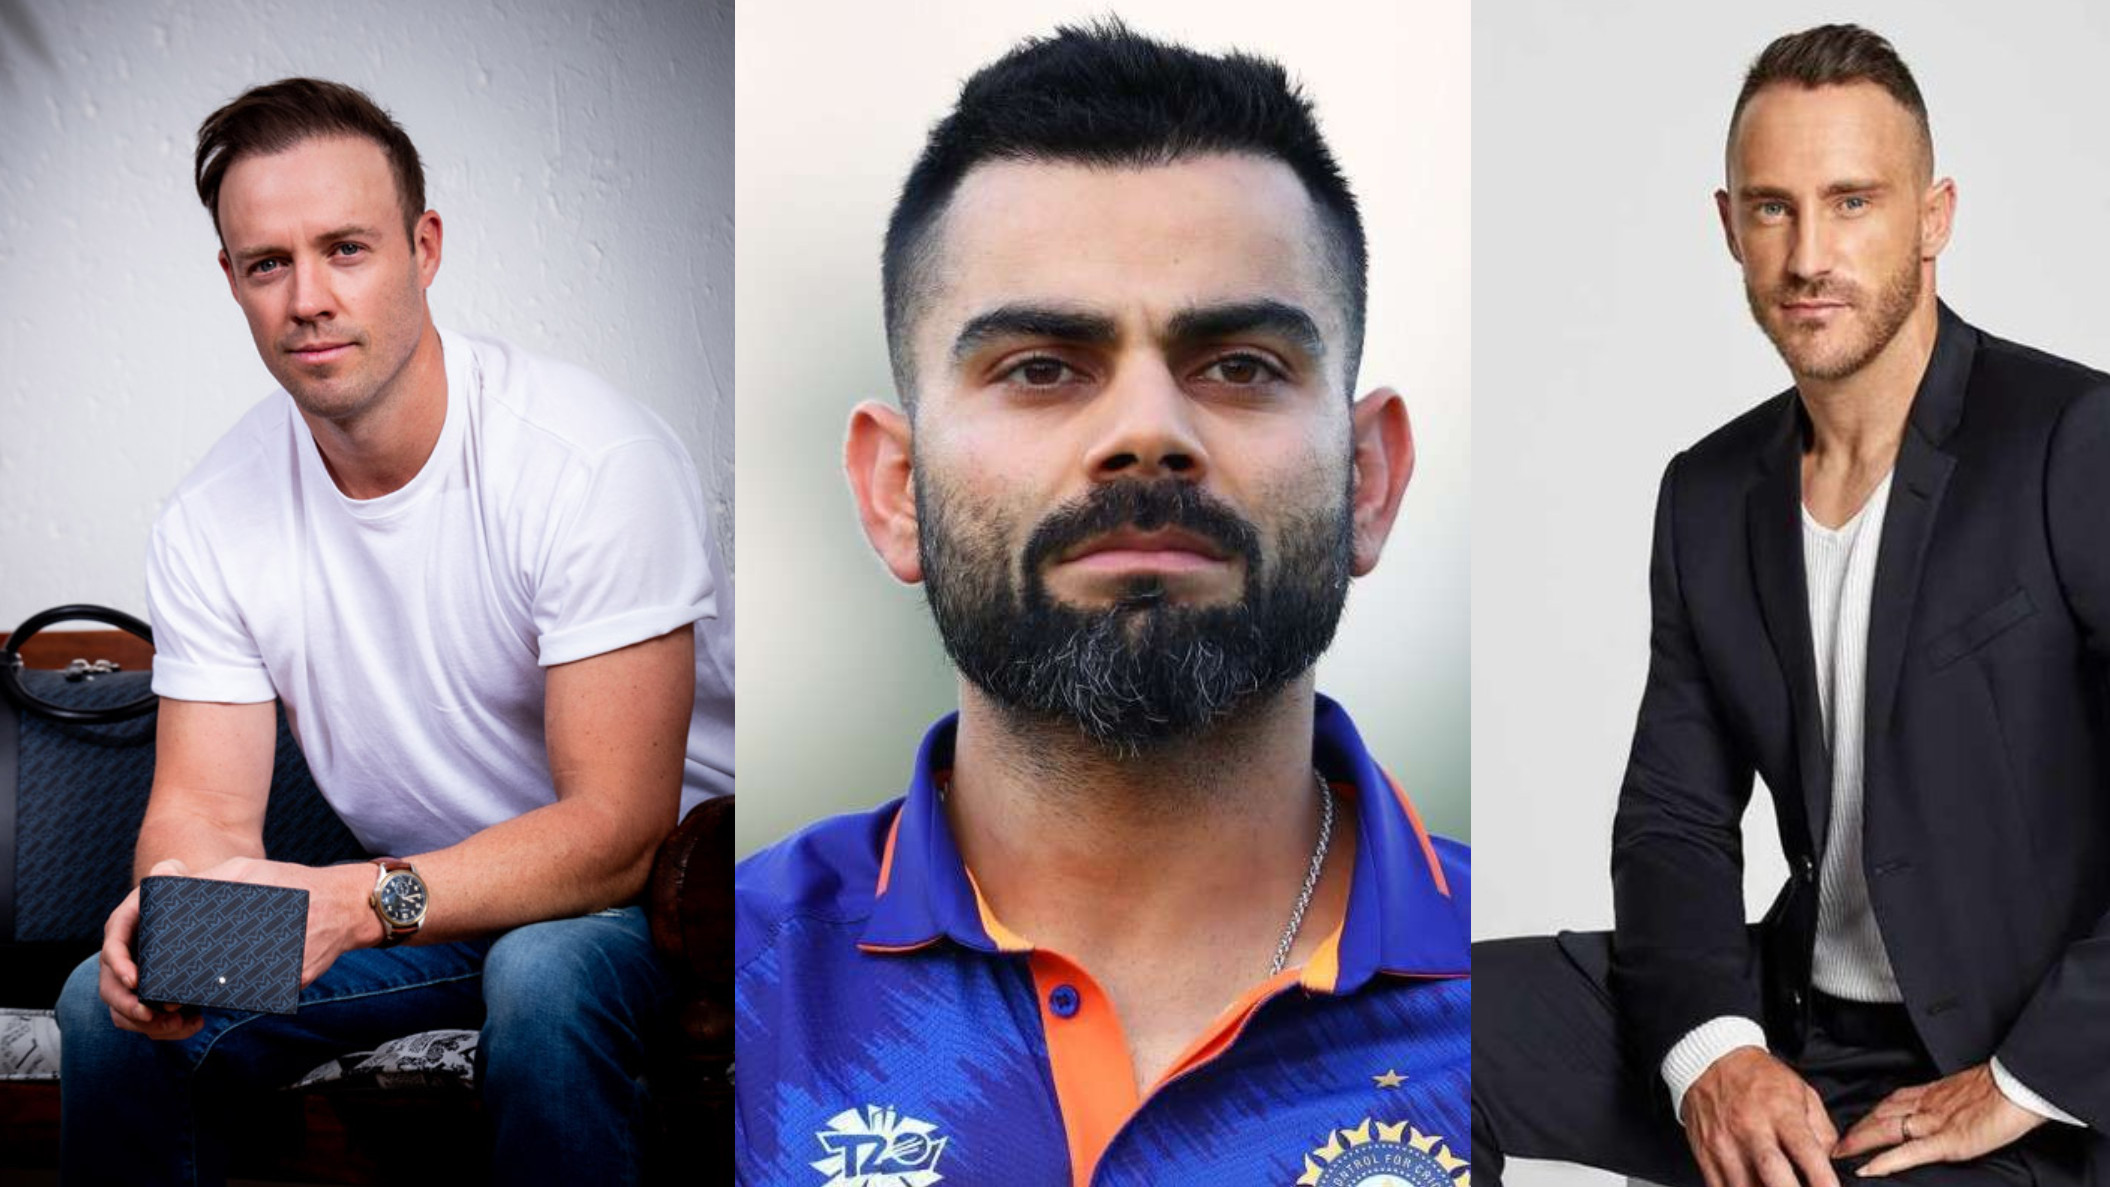 Asia Cup 2022: WATCH- AB de Villiers’ heartfelt message to Virat Kohli; Faf and Steyn also wish him ahead of 100th T20I match